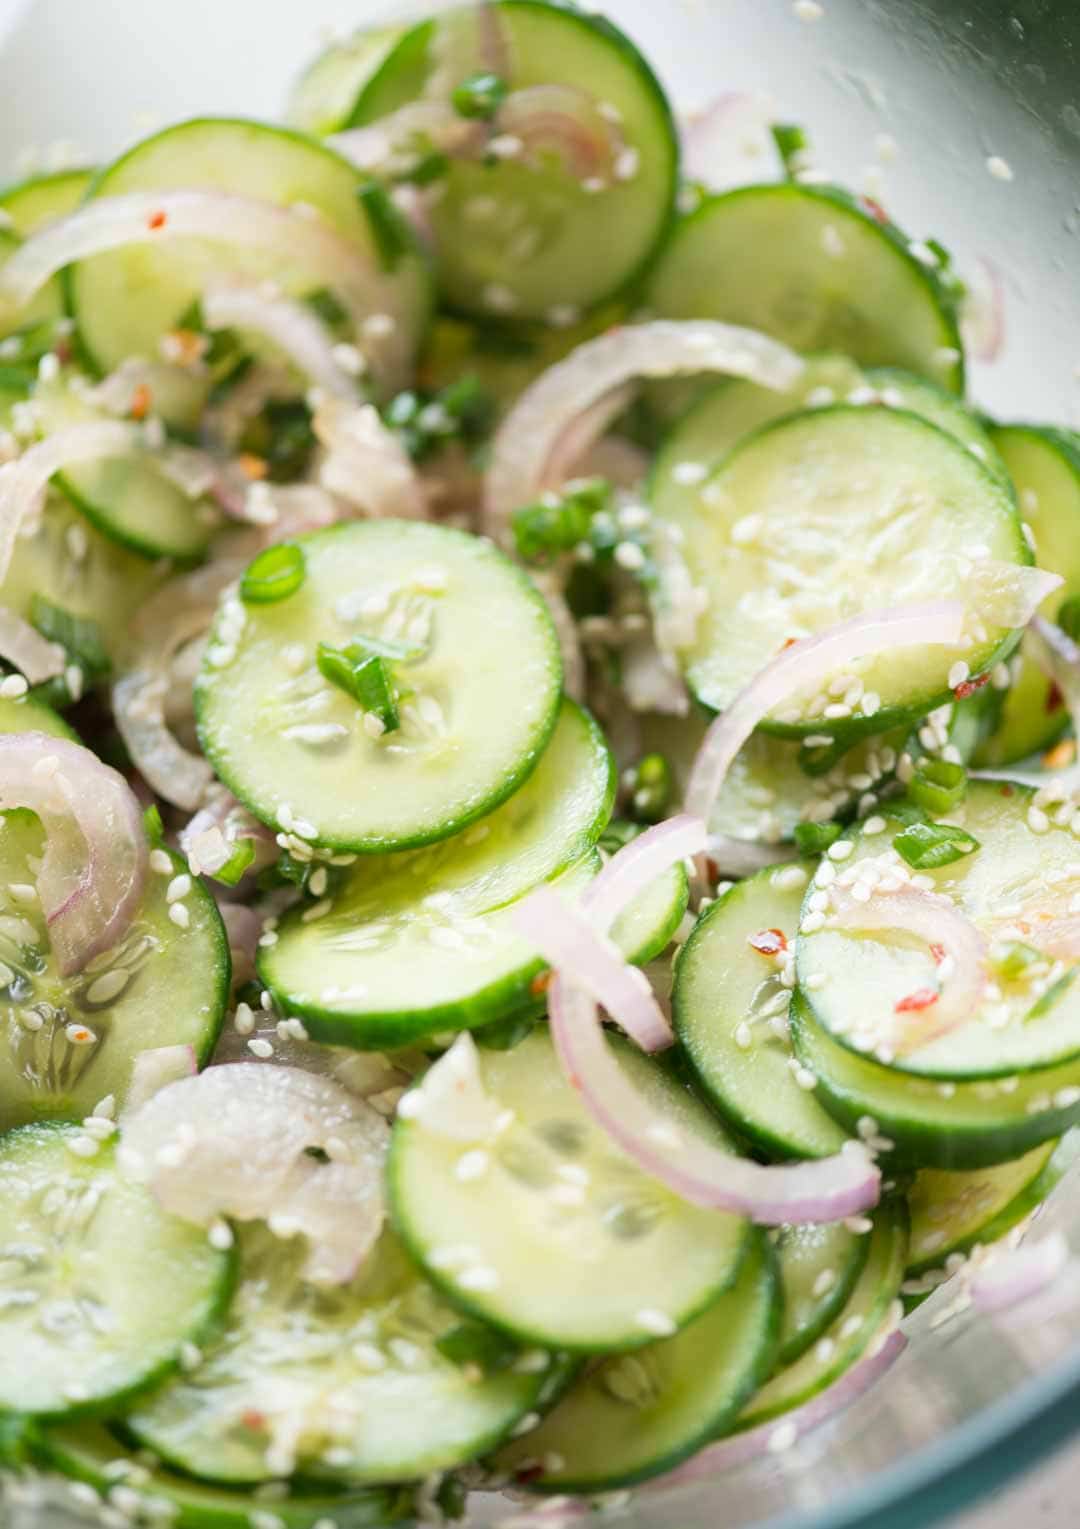 Close view of cucumber salad shows sliced cucumbers, onions, green onions mixed with sesame seeds.